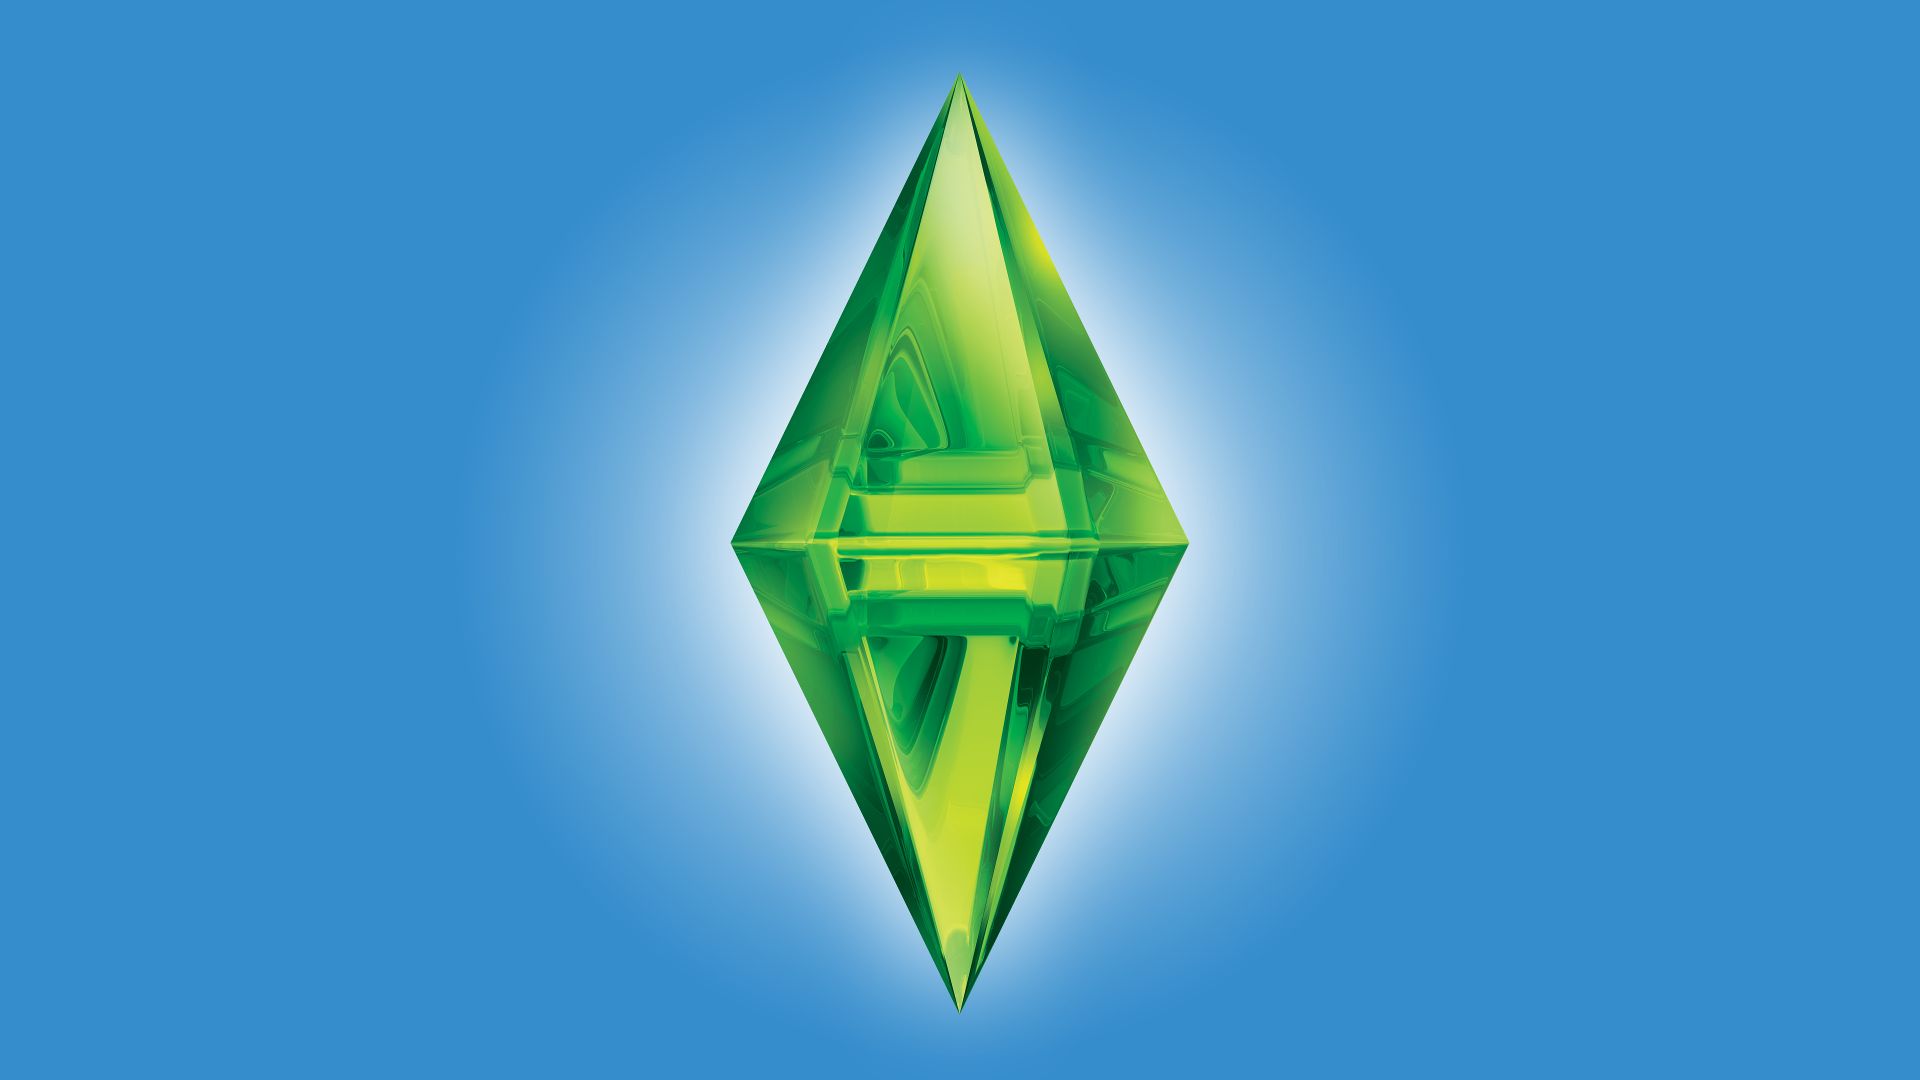 sims 3 complete collection simpoints unlocked torrent